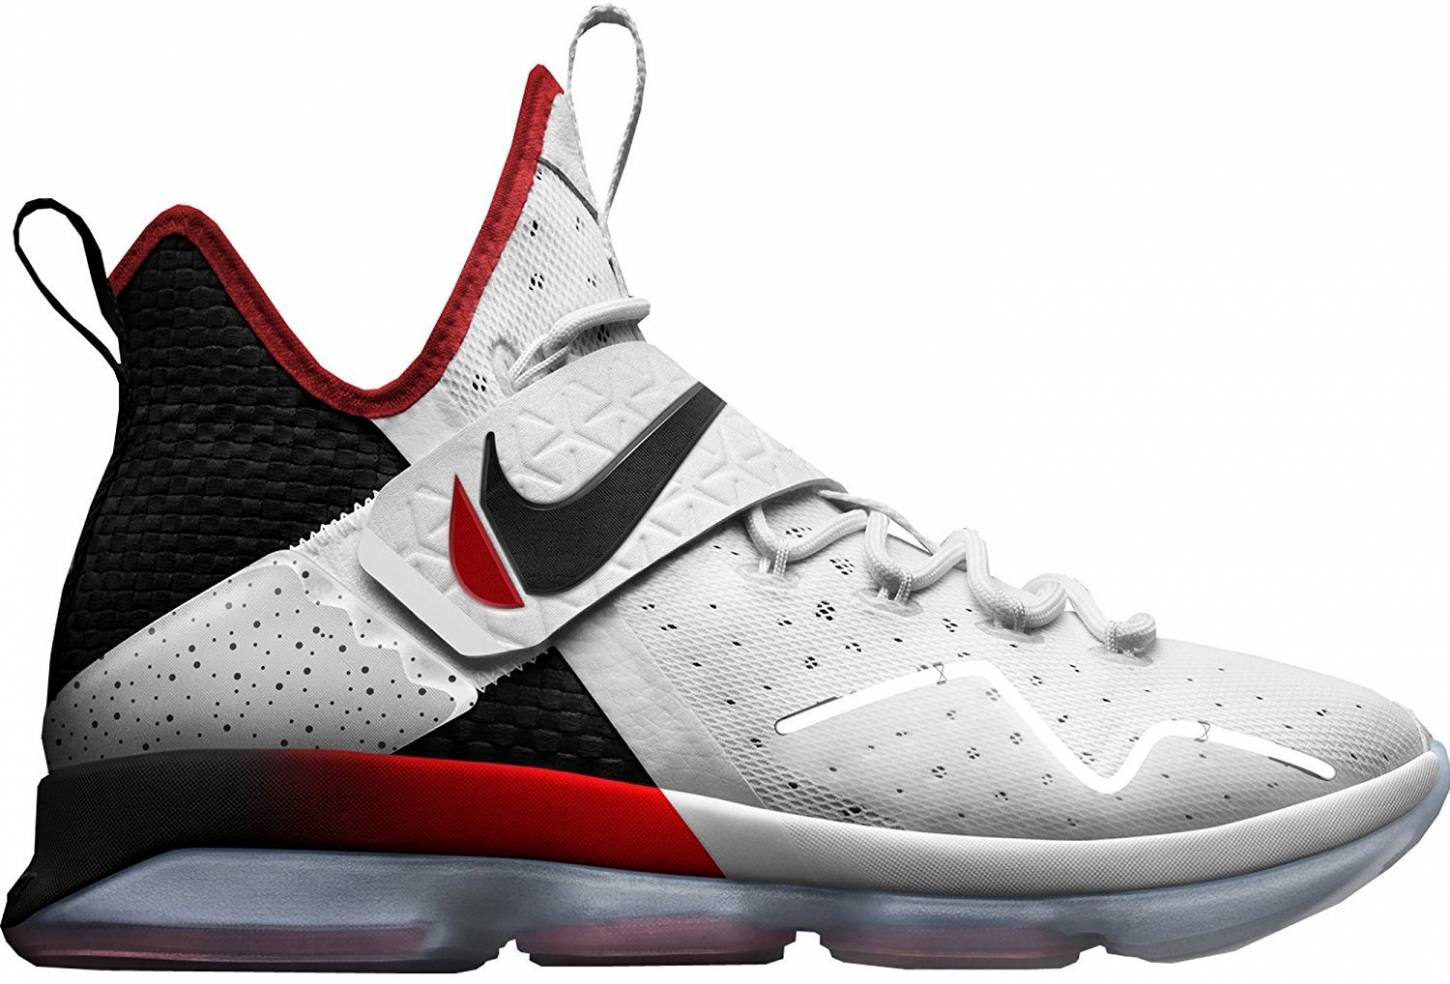 lebron james red and black shoes